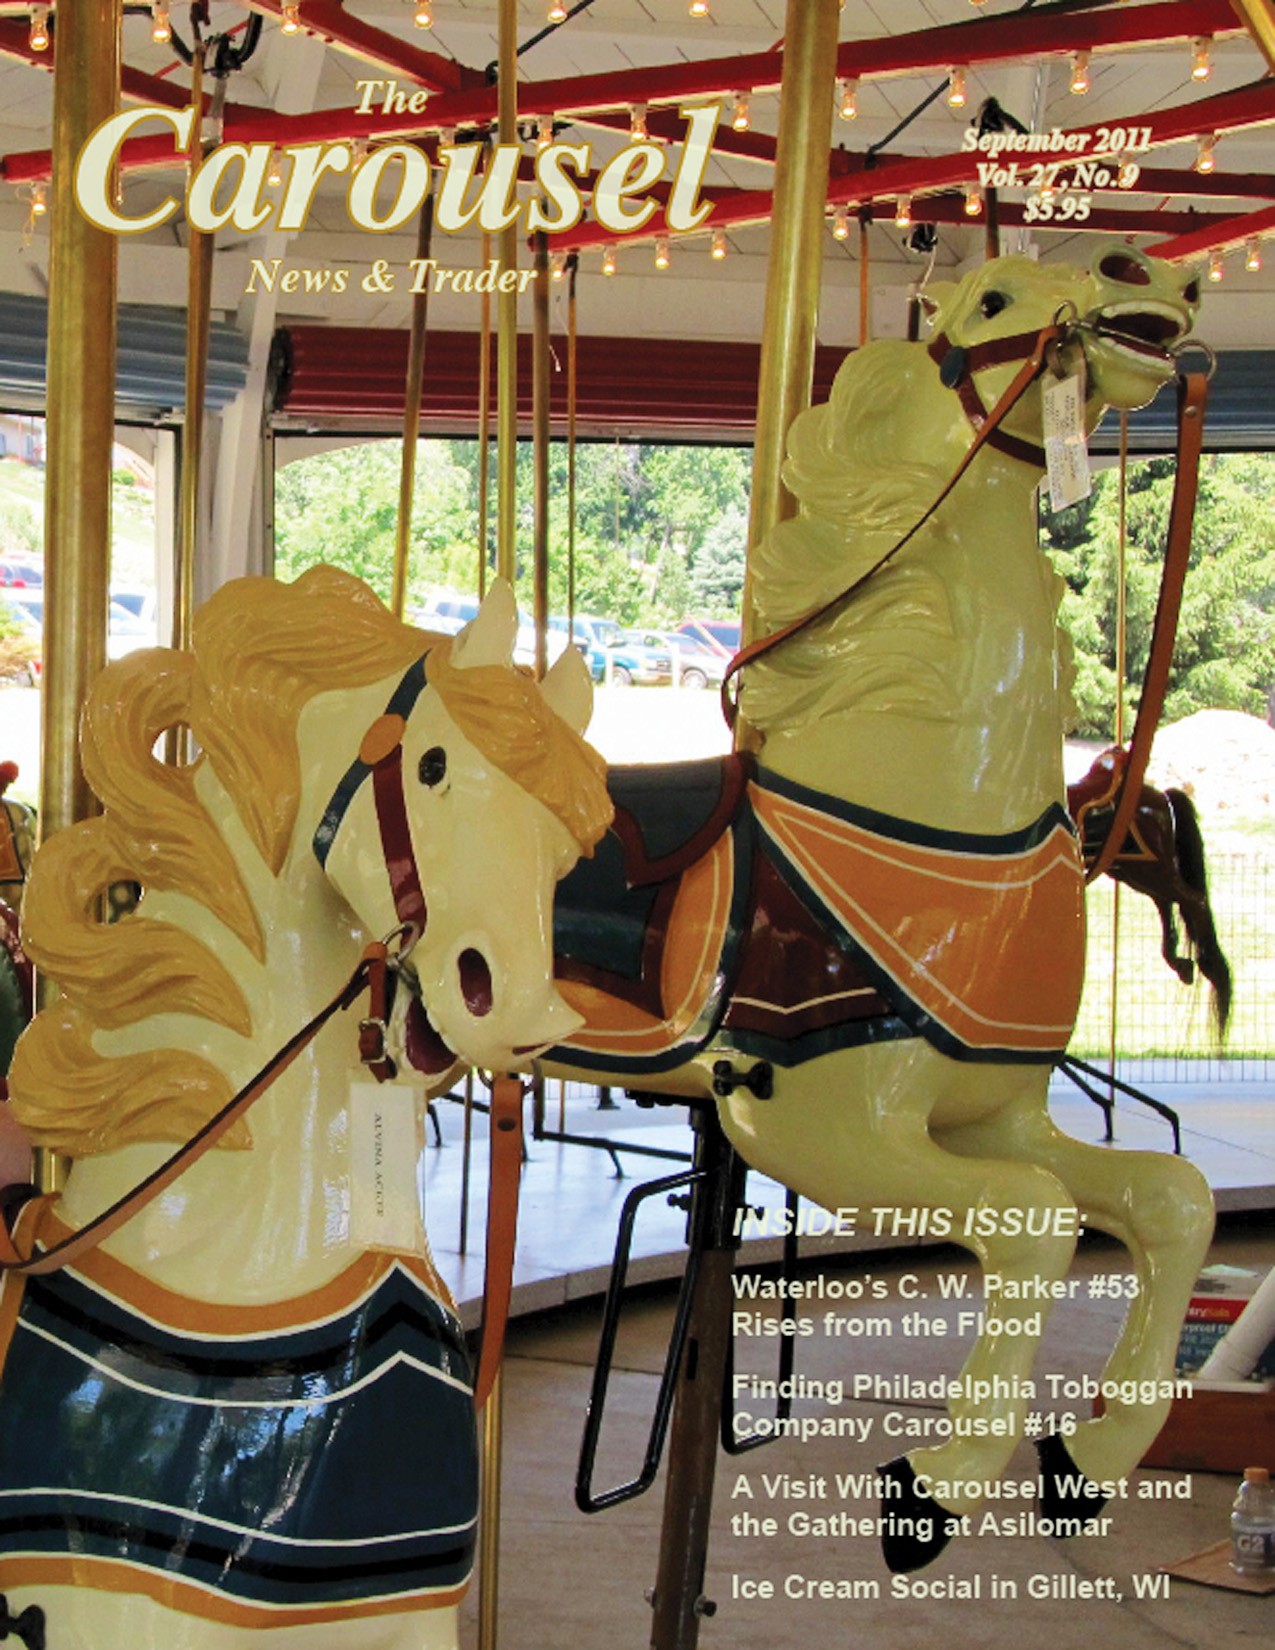 Carousel-news-cover-9-Historic-Waterloo-WI-carousel-September-2011